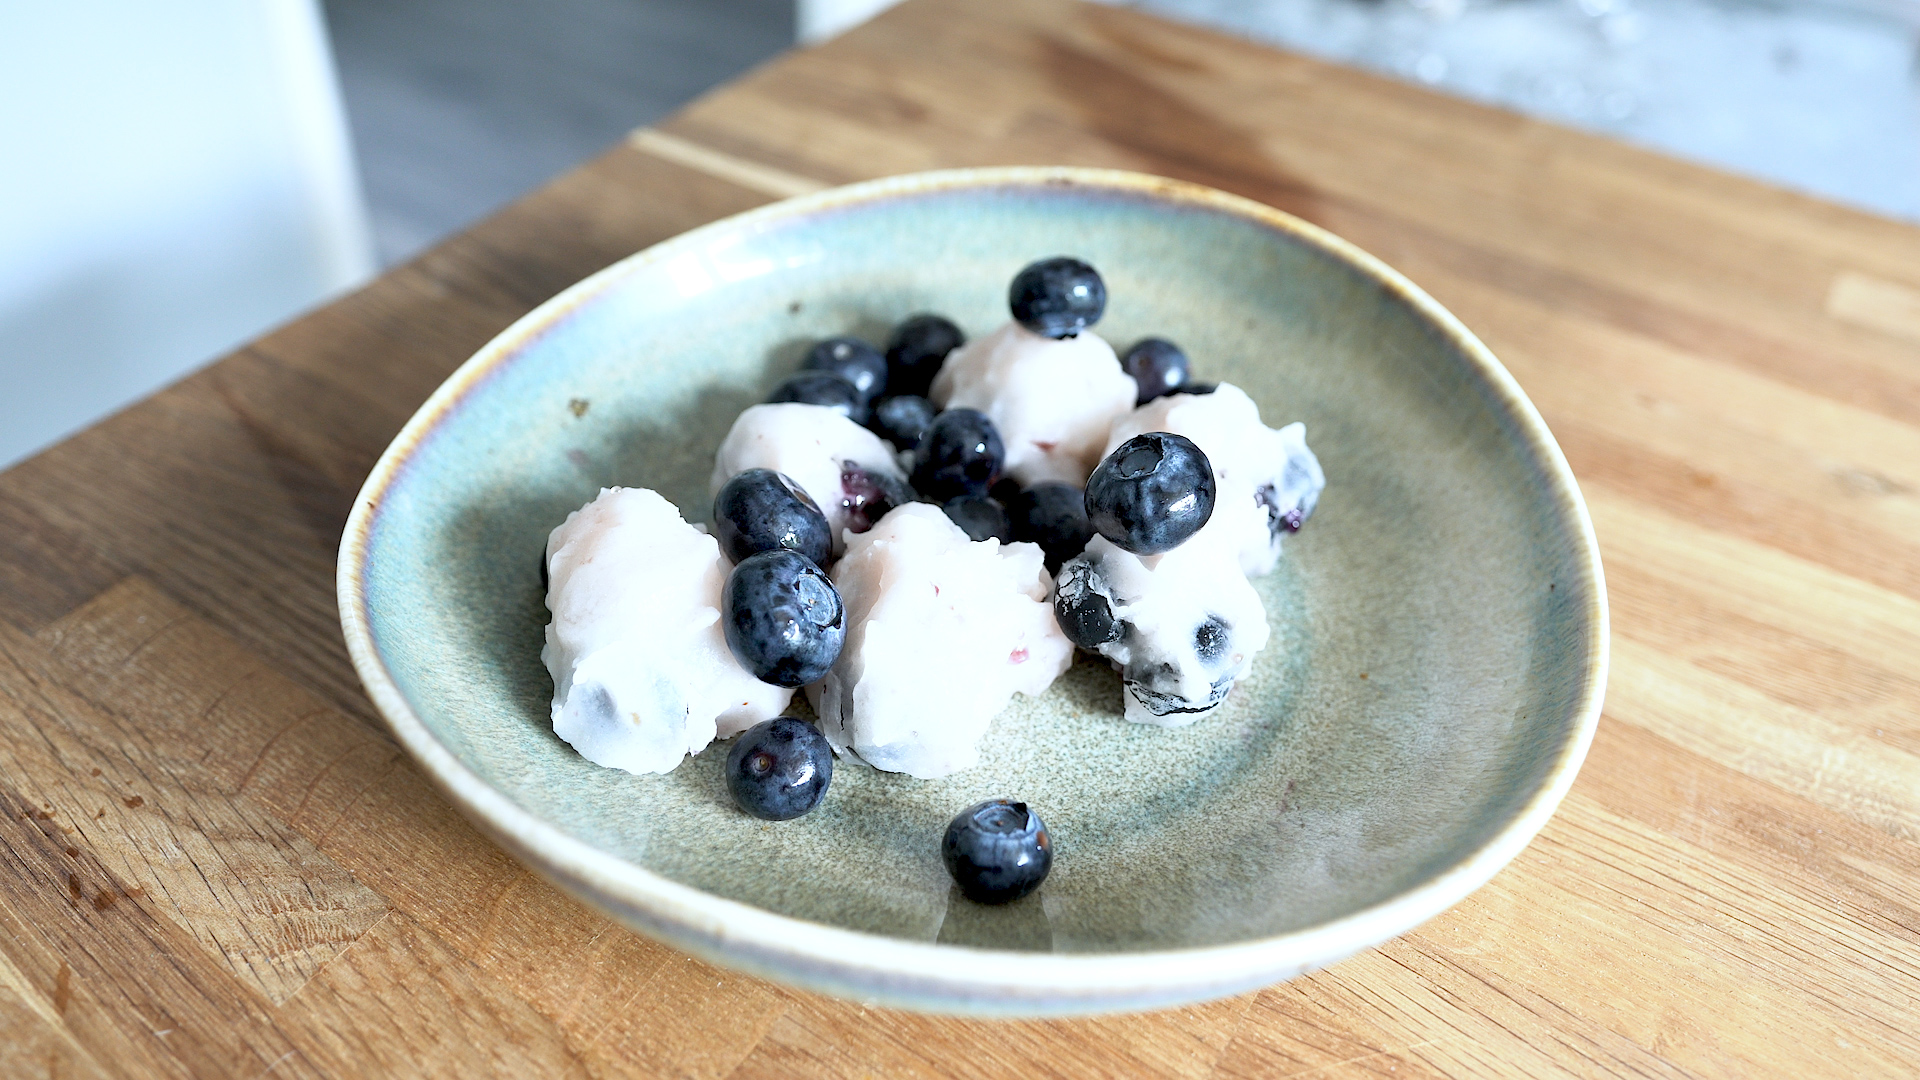 Frozen coconut and blueberry treats on mint green plate